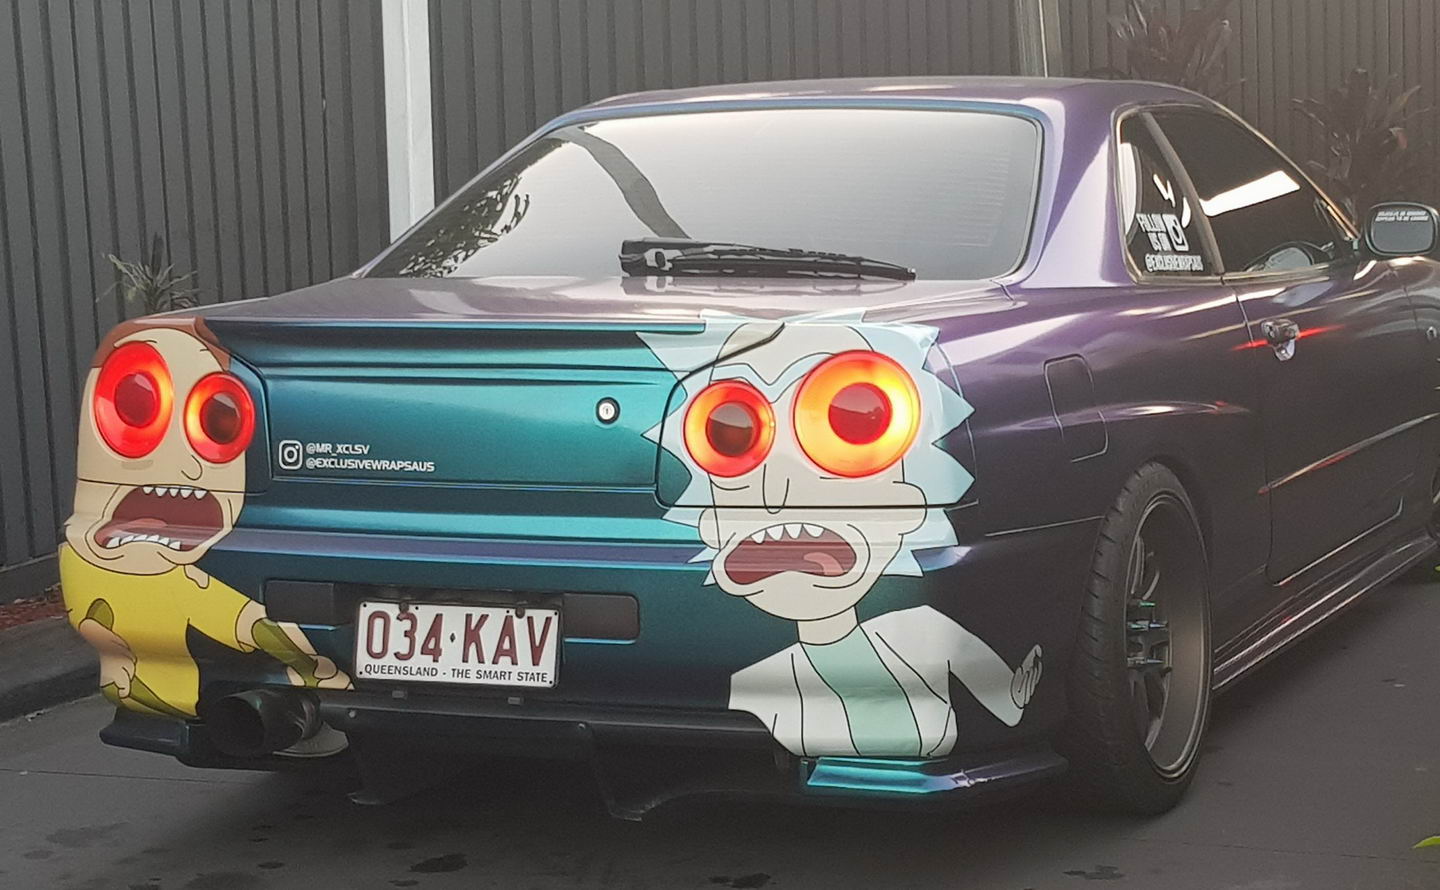 random rick and morty skyline - Supe Exclusivewrapsaus 034 Kav .Queensland The Smart State,